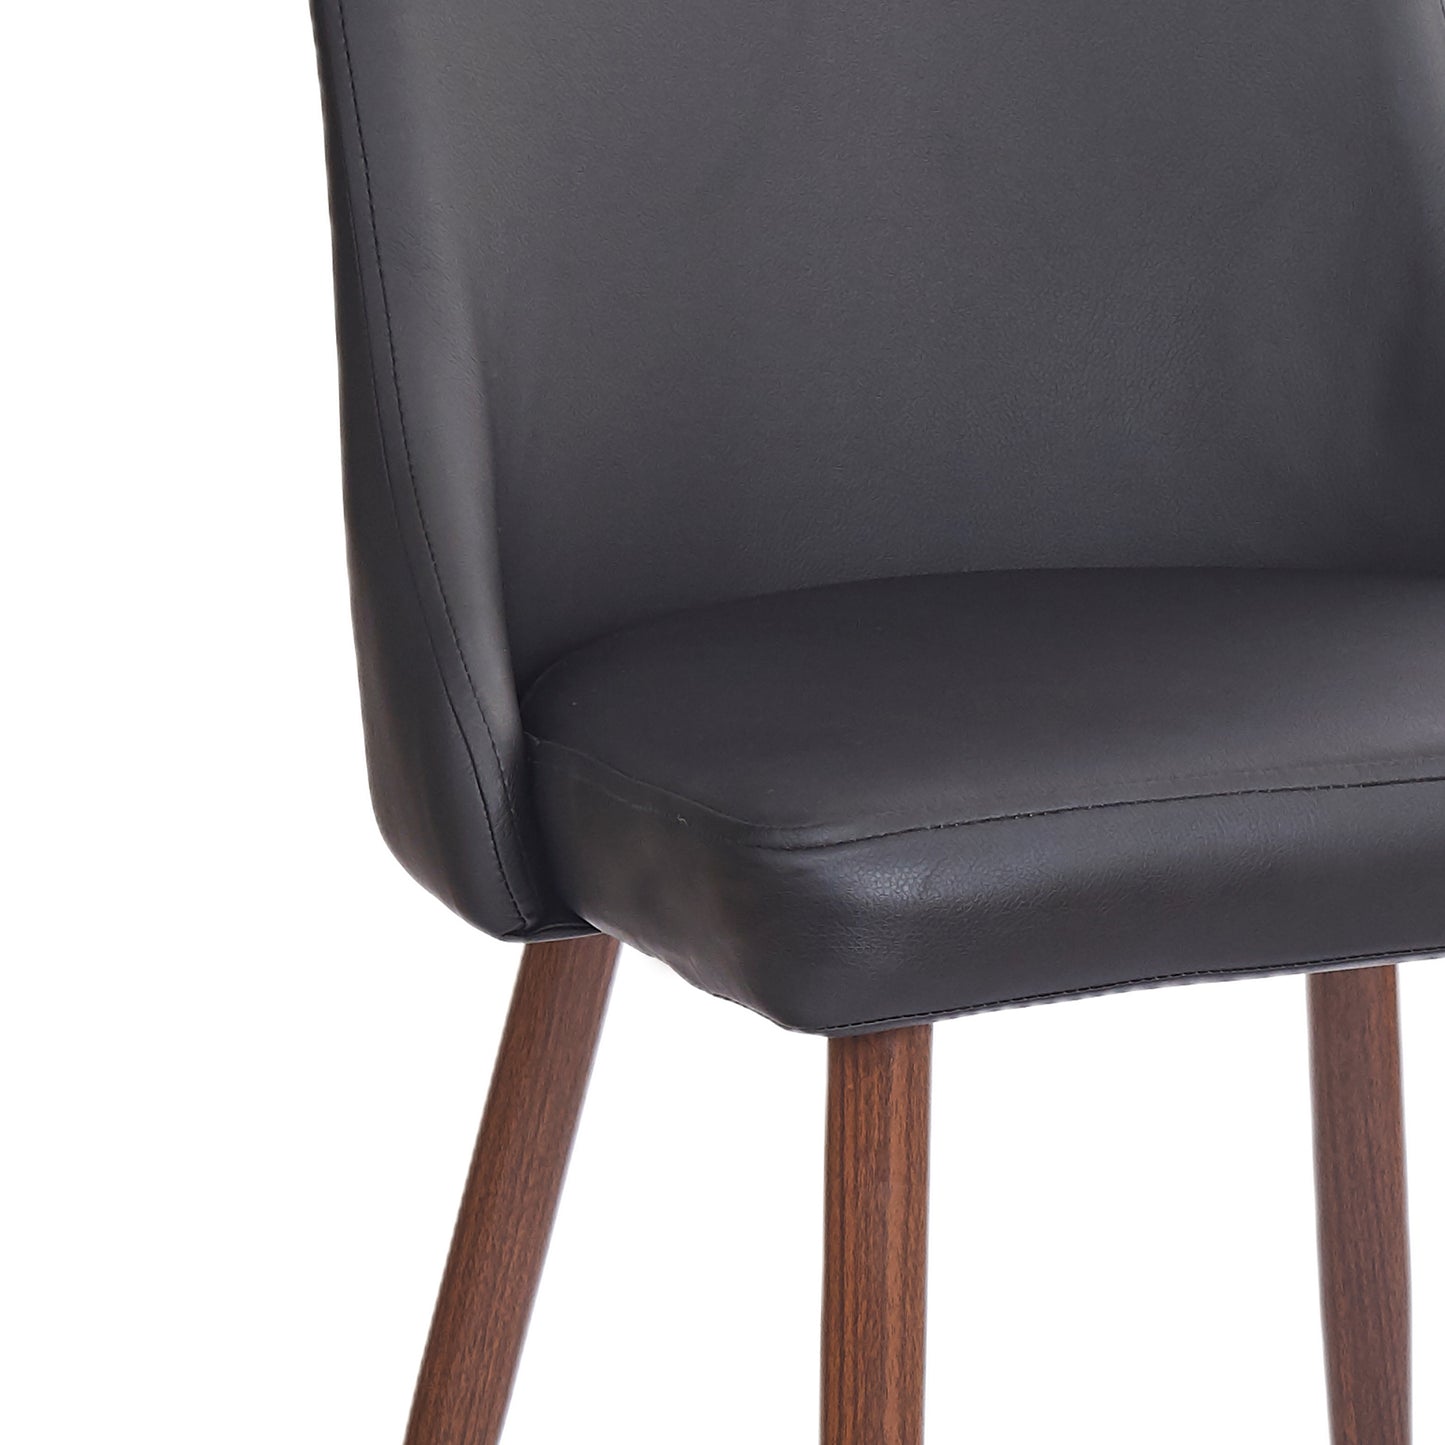 (CORA BLACK- 2 PACK)- LEATHER DINING CHAIRS